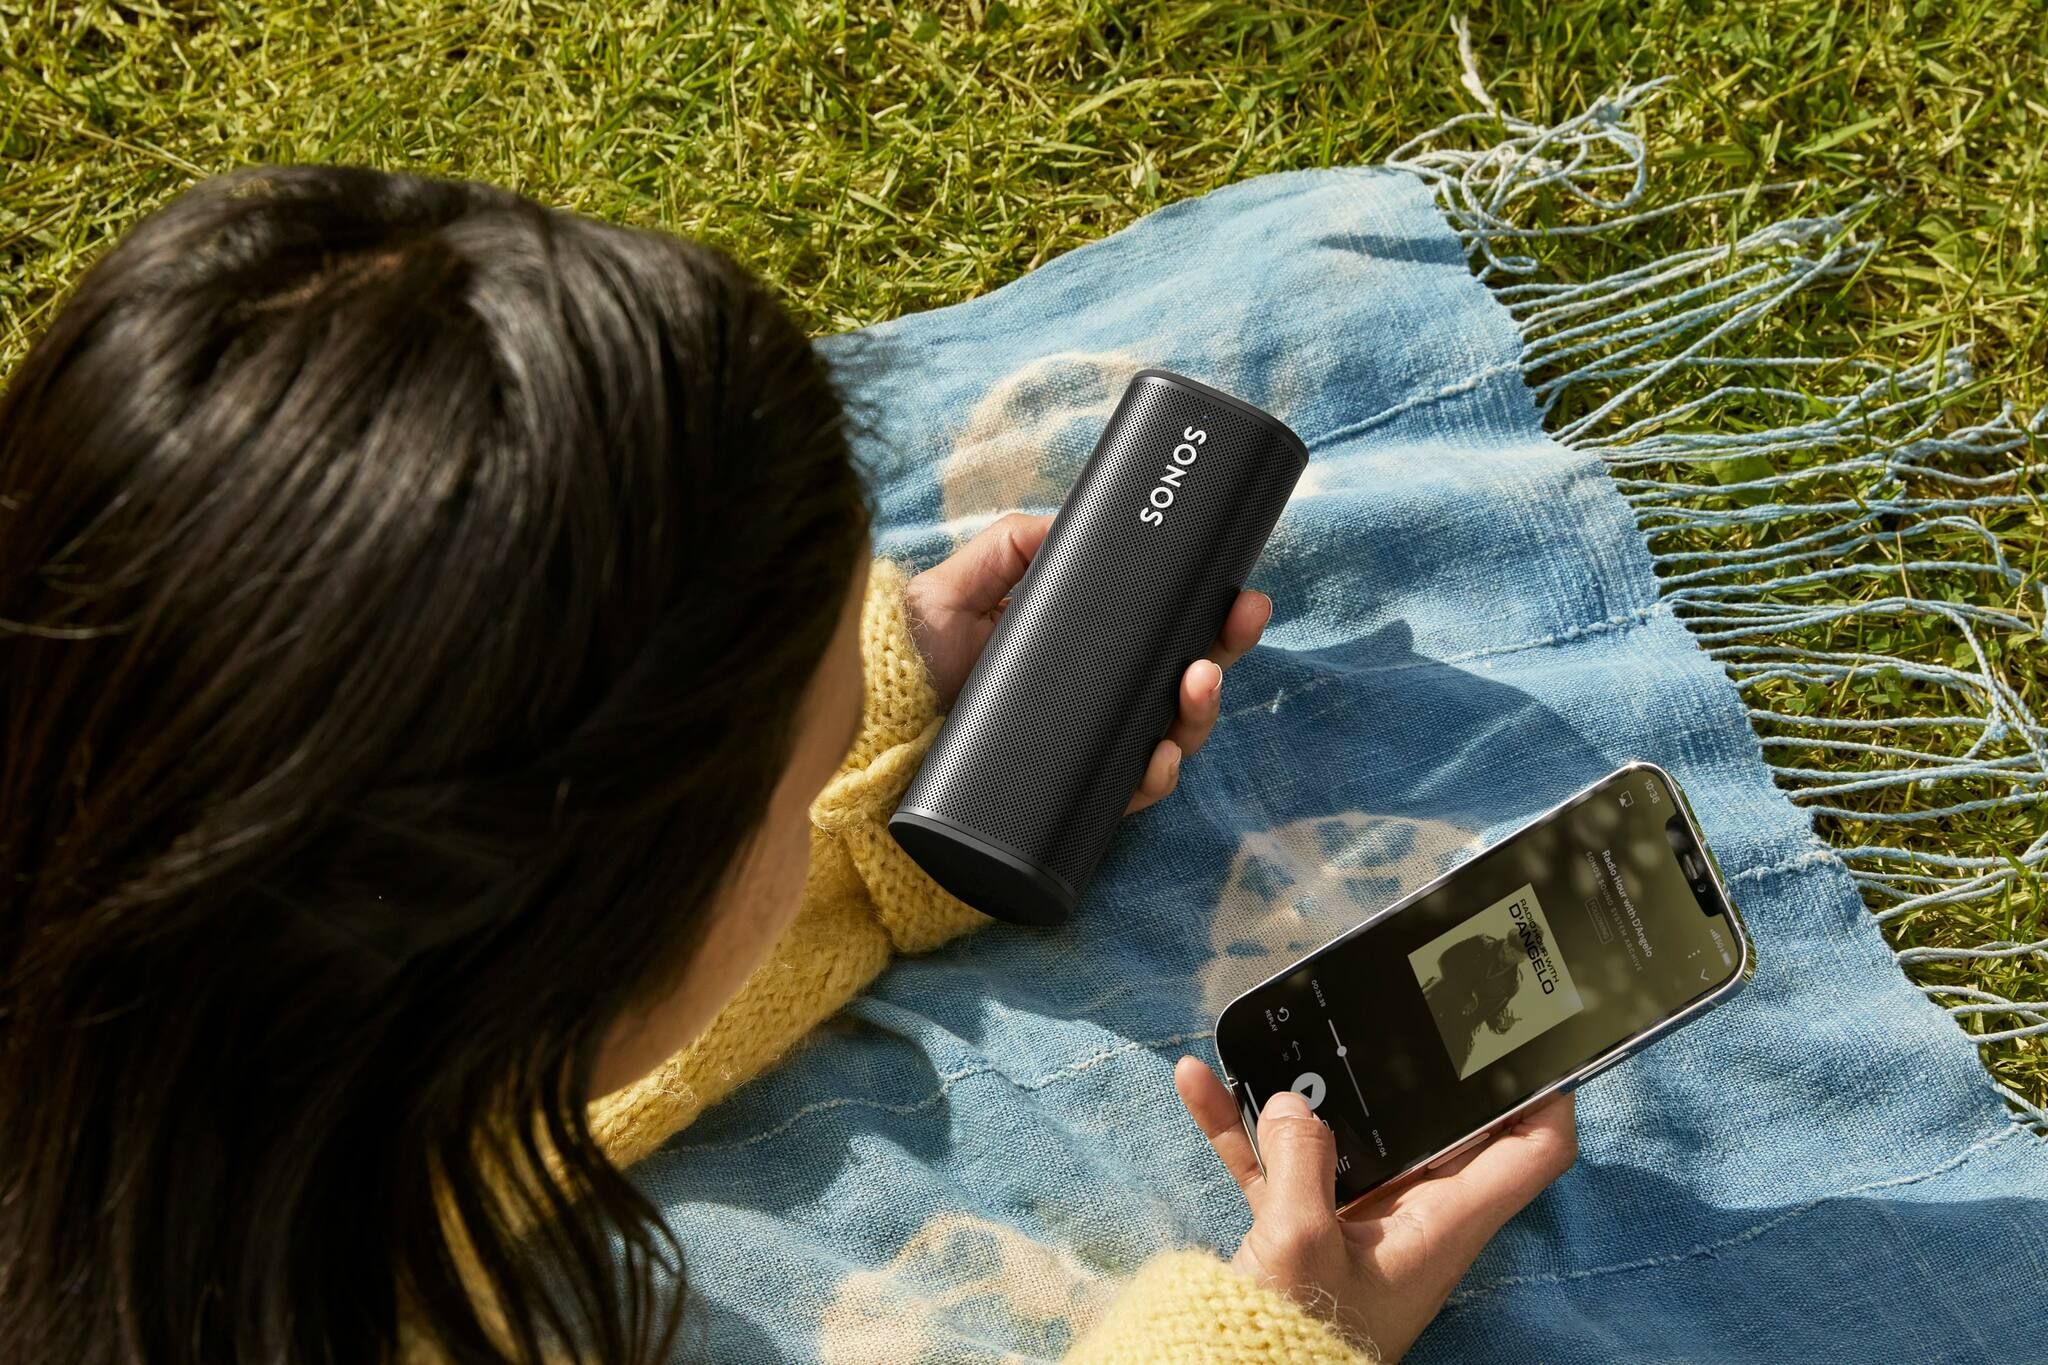 Lady lying on picnic mat, holding Sonos Roam and scrolling through music on phone